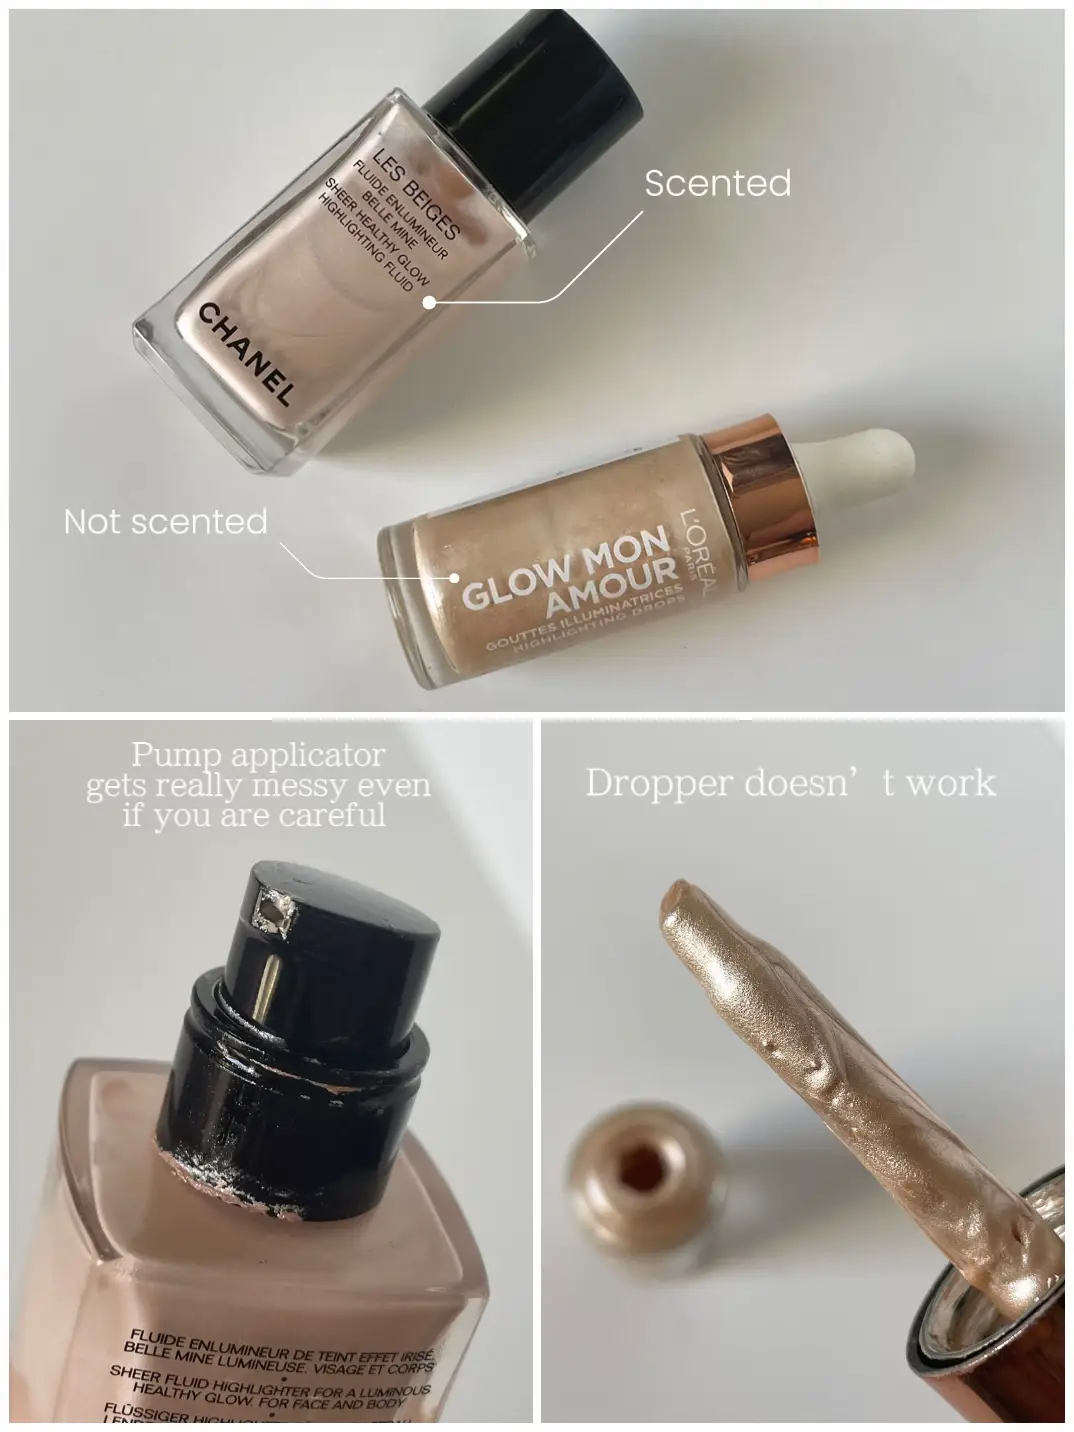 Chanel Les Beiges Sheer Healthy Glow Highlighting Fluid Sunkissed/Full Face  of Chanel/Tissé Rivoli 